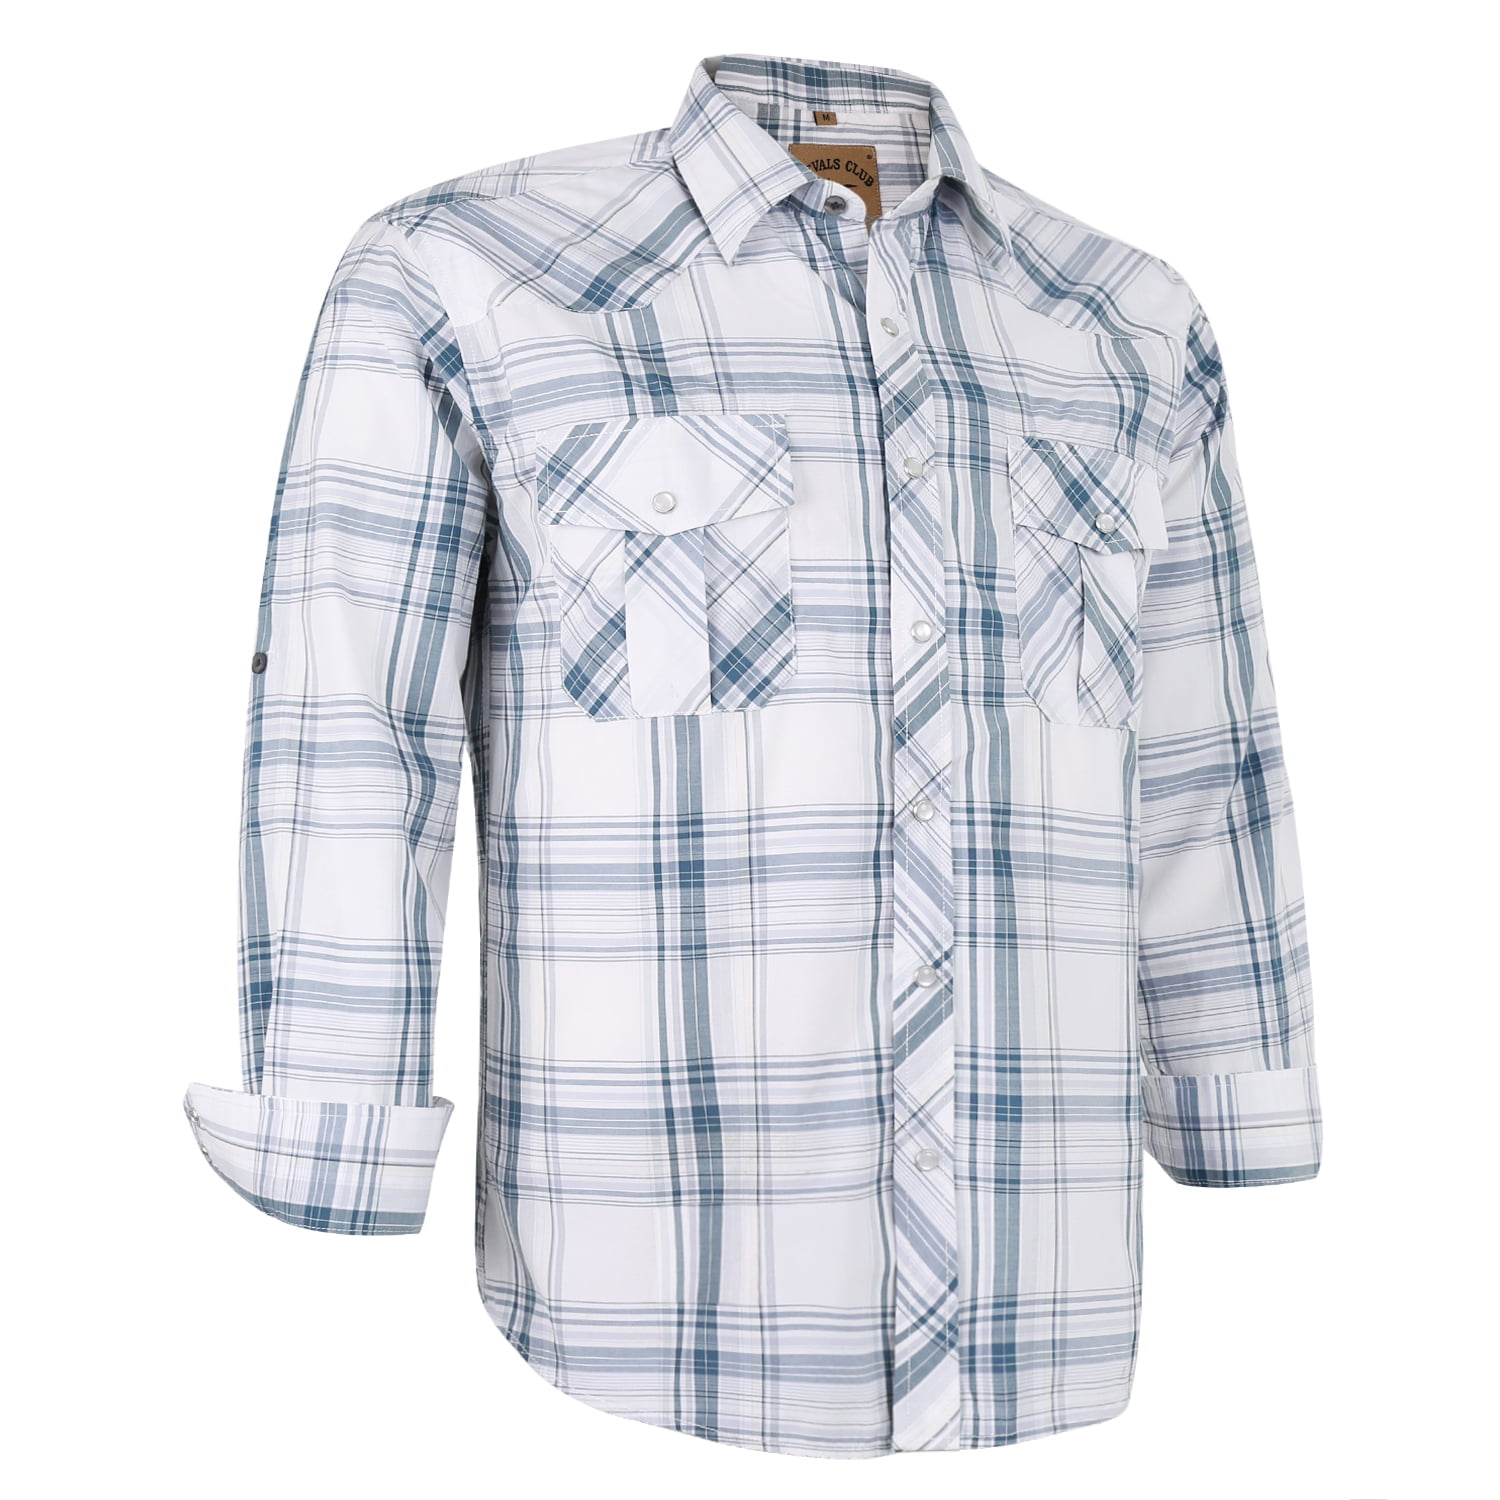  Fishing Shirts for Men Big and Tall Men's Western Cowboy Long  Sleeve Pearl Snap Casual Plaid Work Shirts #0811 White : Ropa, Zapatos y  Joyería